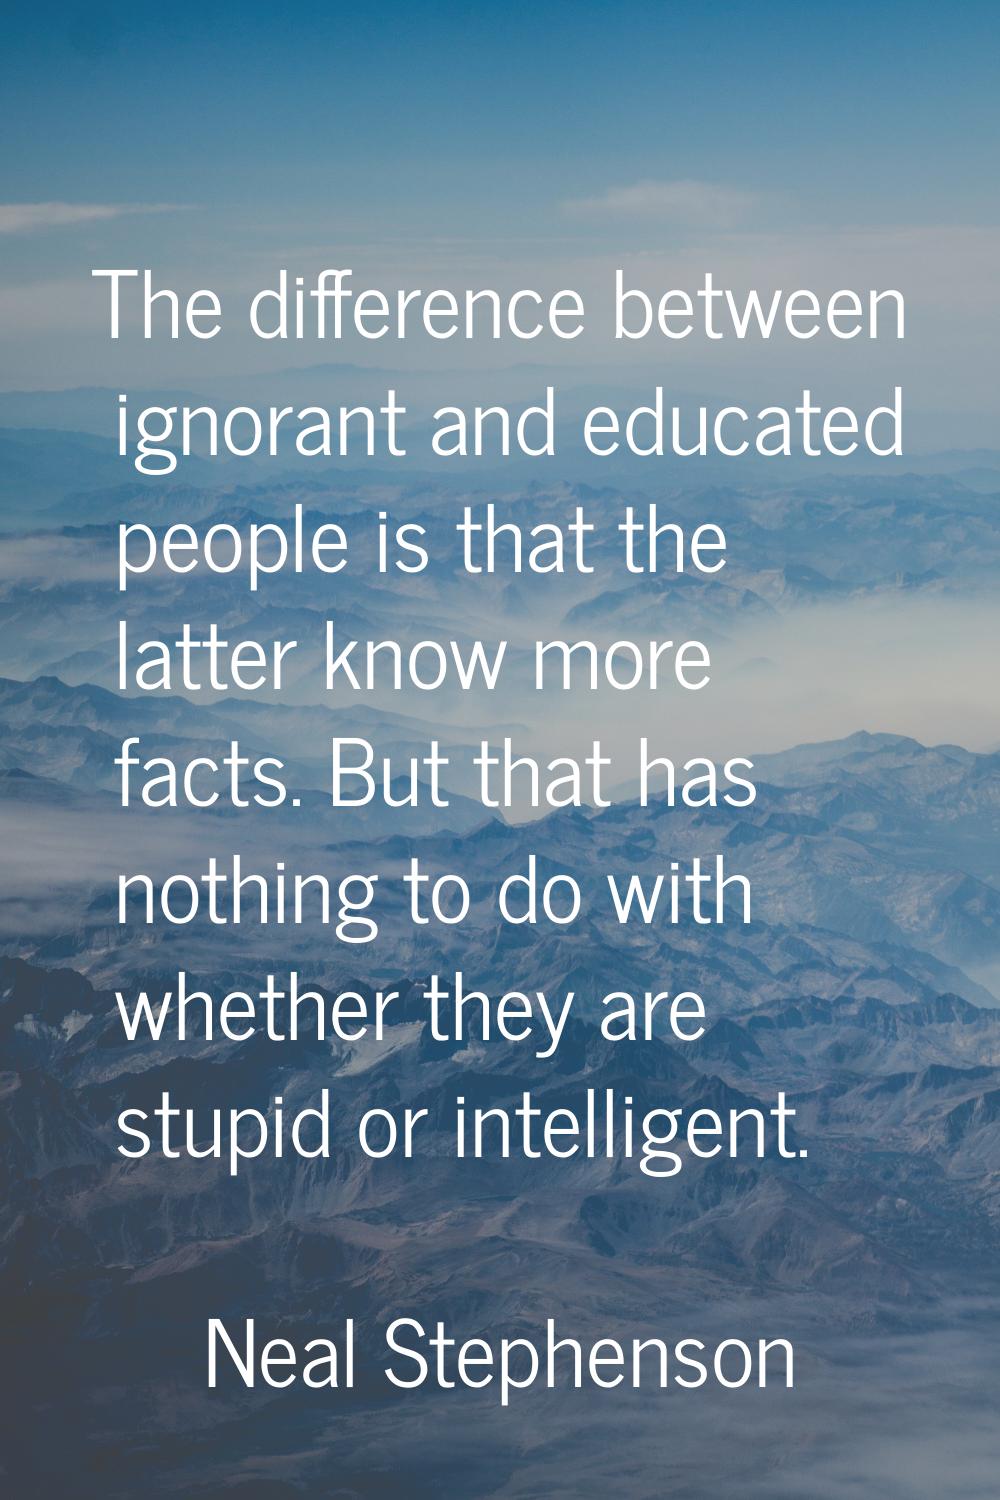 The difference between ignorant and educated people is that the latter know more facts. But that ha